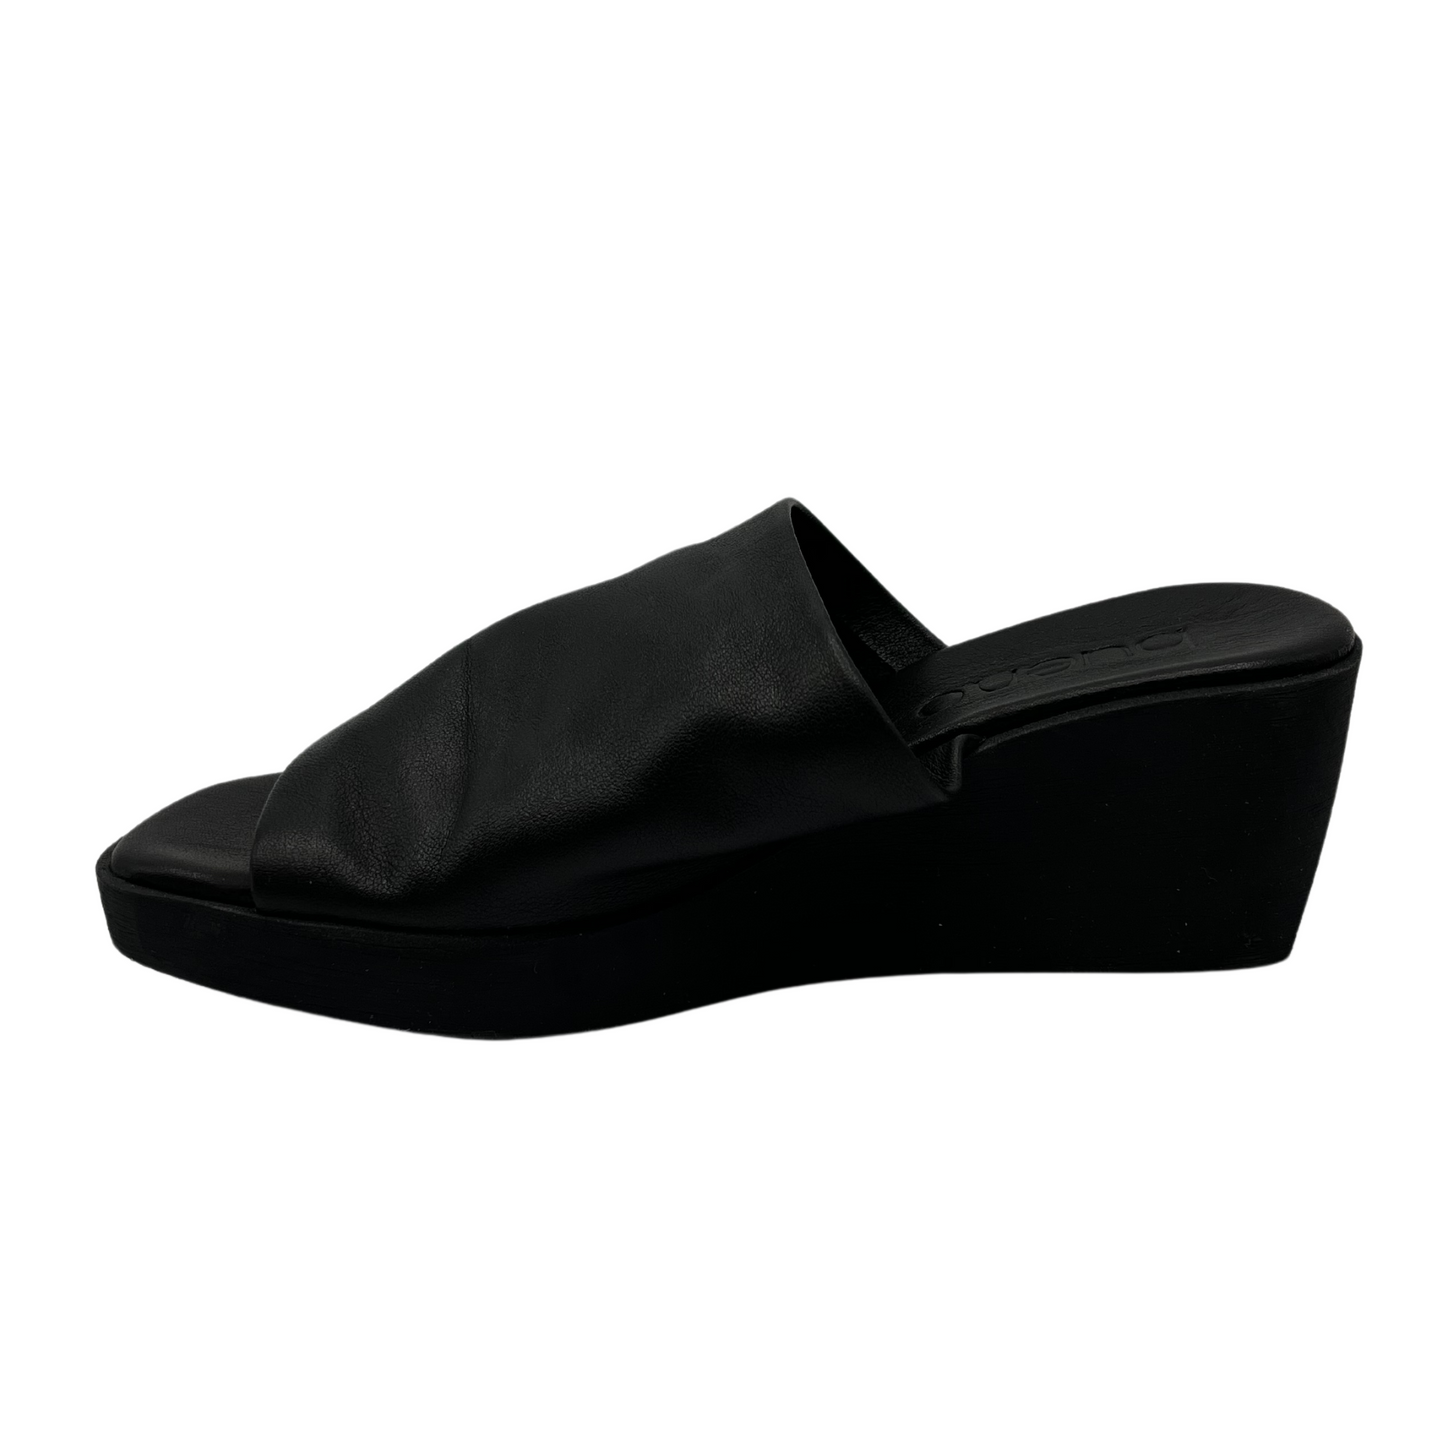 Left facing view of black leather wedge sandal with square toe and black outsole